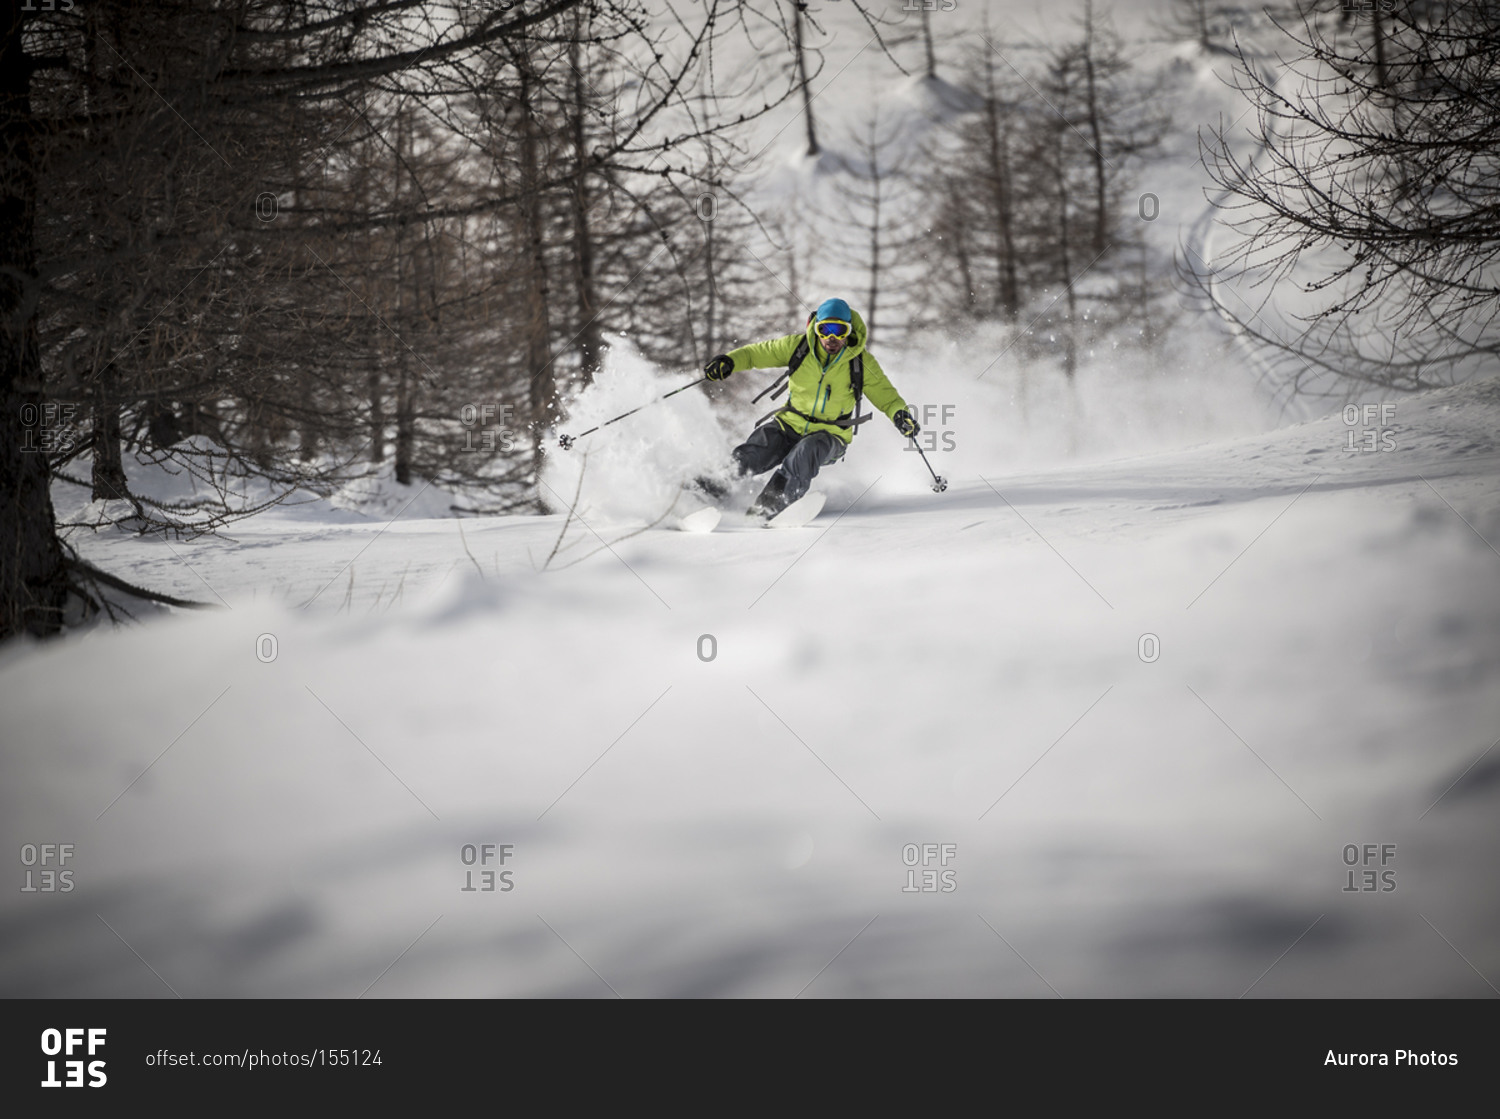 A backcountry skier descends a steep slope in Devero, Ossola, Italy